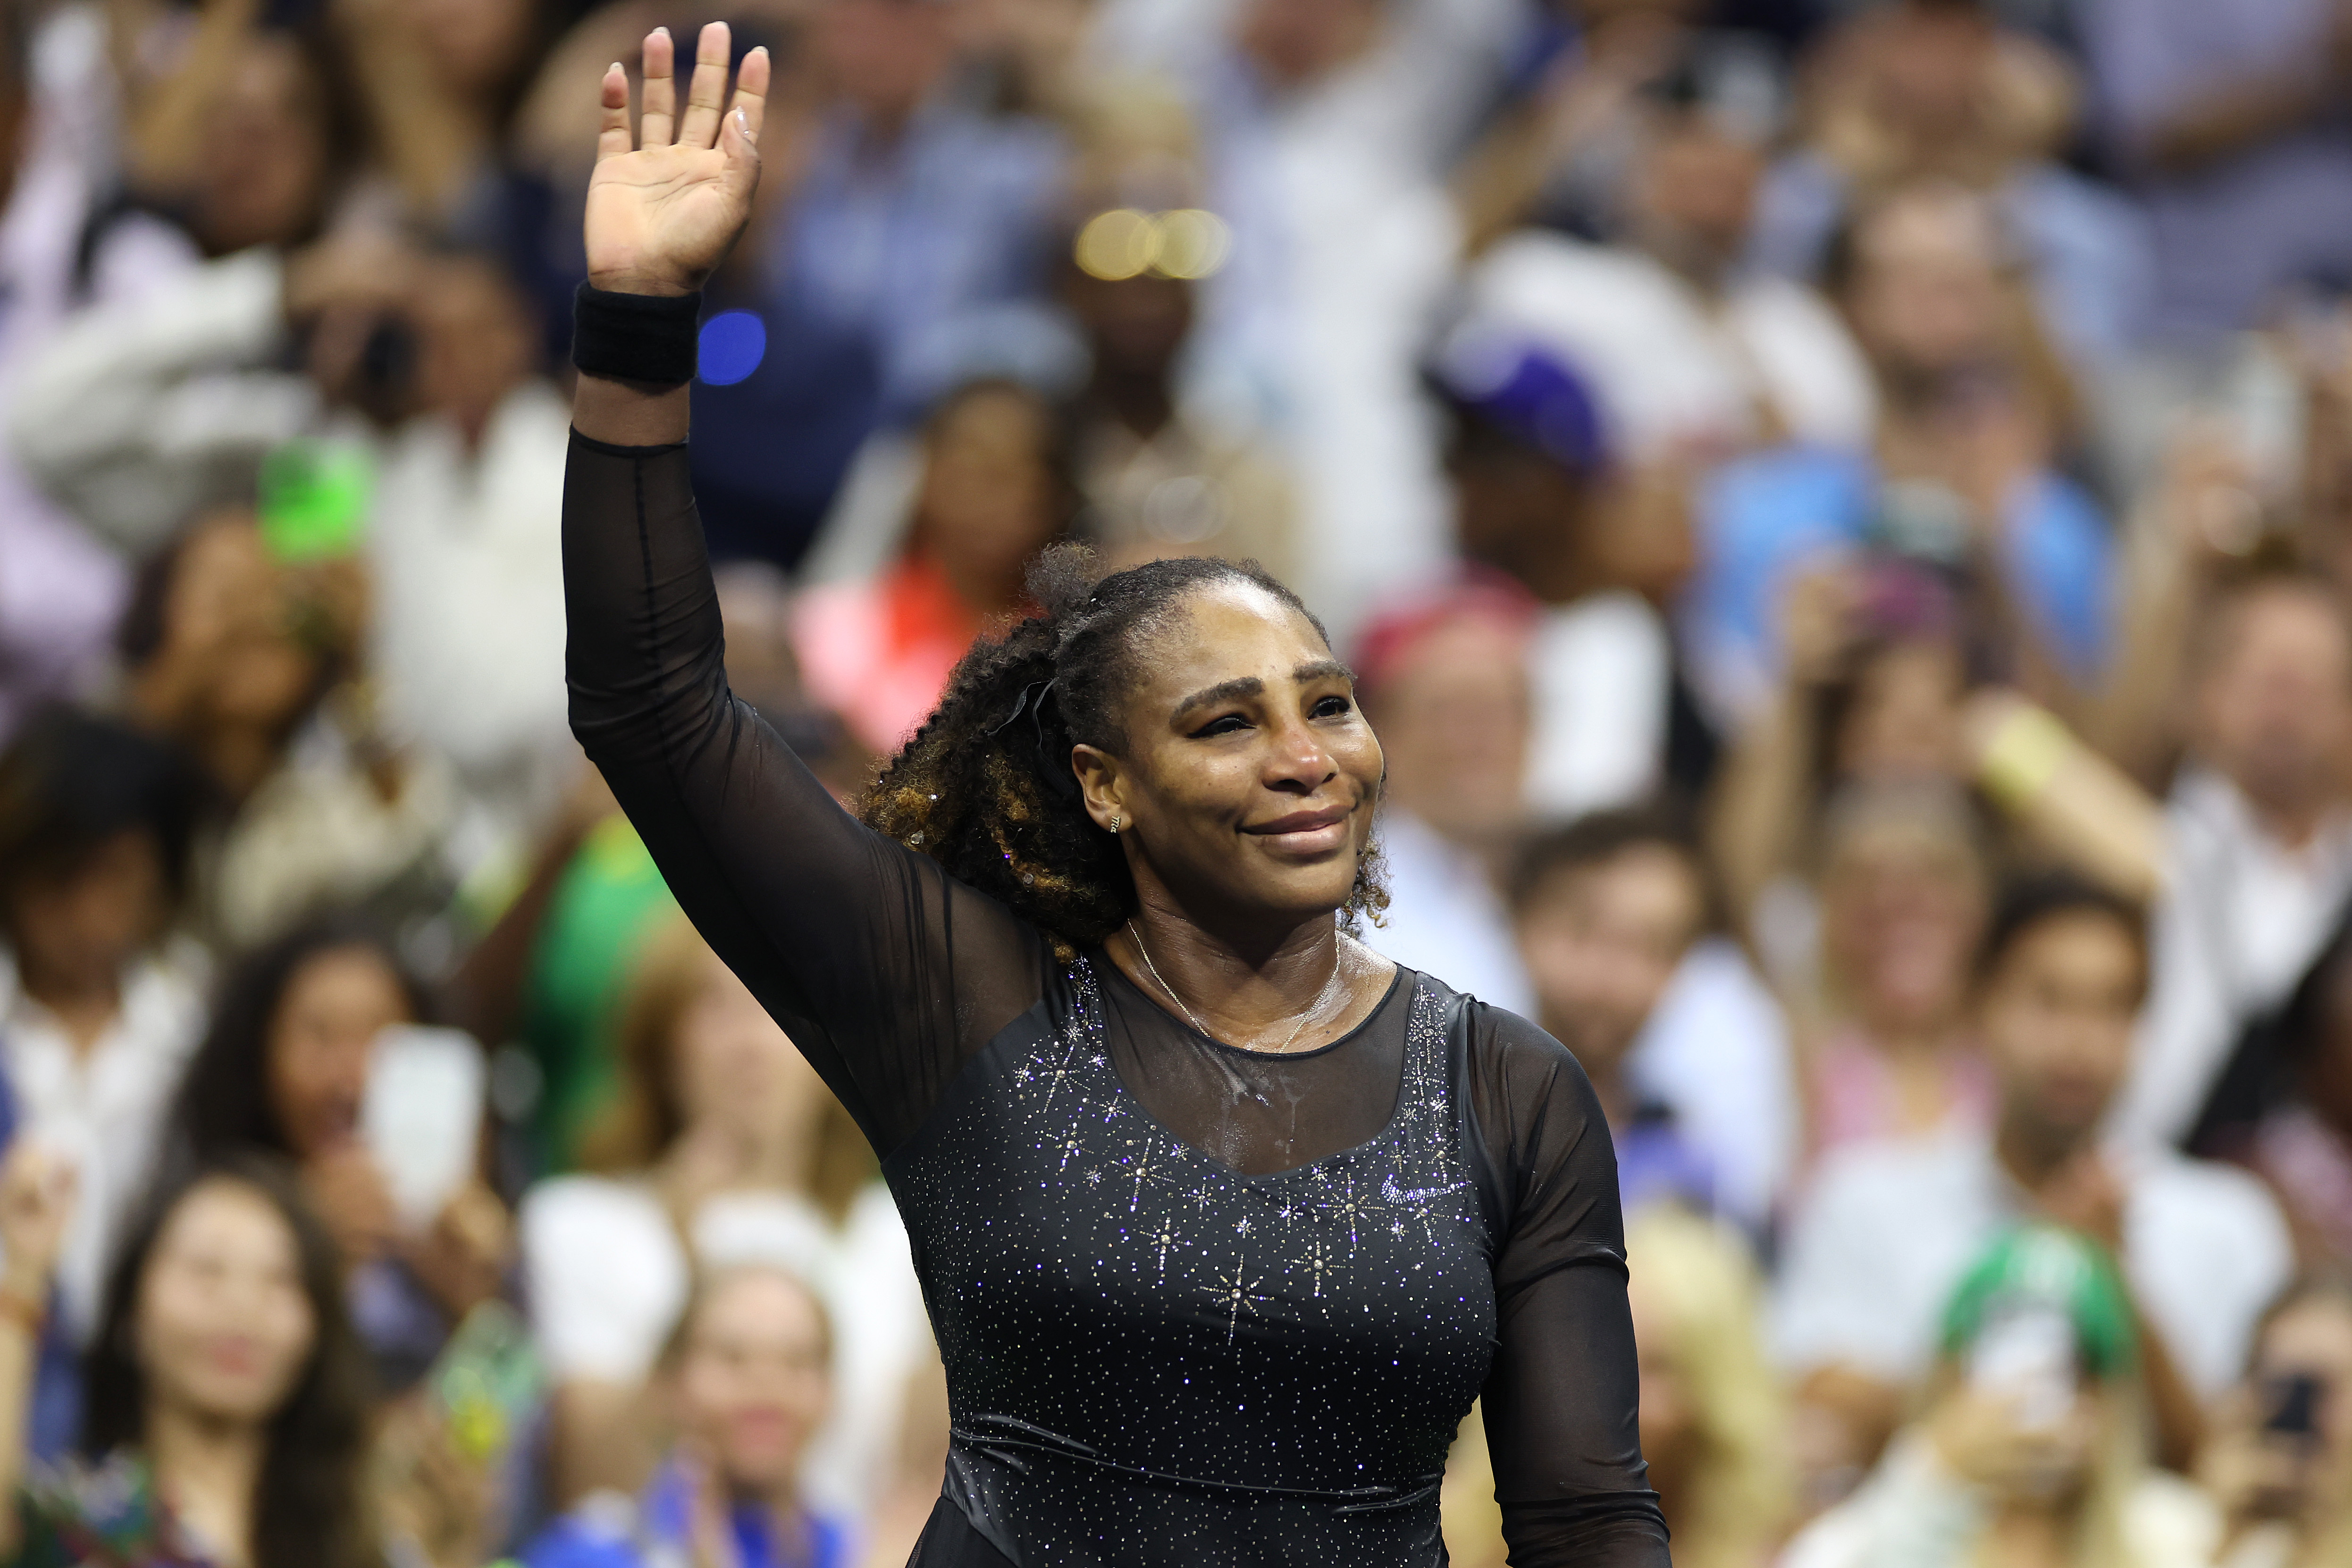 Berlei taps long-time fan and 23-time Grand Slam champion, Serena Williams  for campaign - Ragtrader